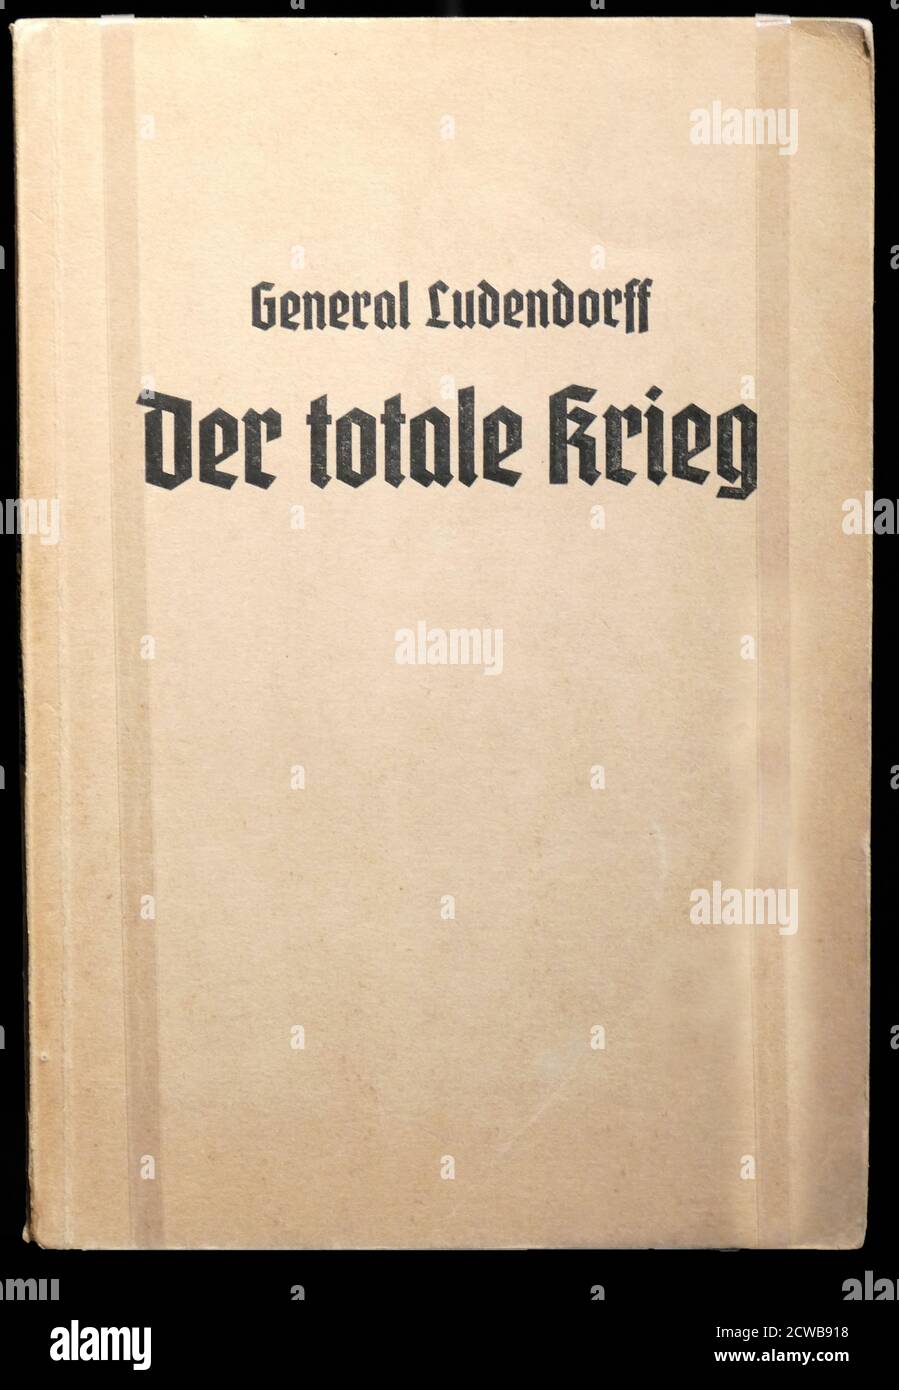 Title page from 'Der Totale Krieg' 1935, by Erich Ludendorff (1865 - 1937); German general. From 1924 to 1928, he represented the German Volkisch Freedom Party in the Reichstag. Ludendorff developed the theory of 'Total War', which he published as Der Totale Krieg (The Total War) in 1935. In this work, he argued that the entire physical and moral forces of the nation should be mobilized Stock Photo